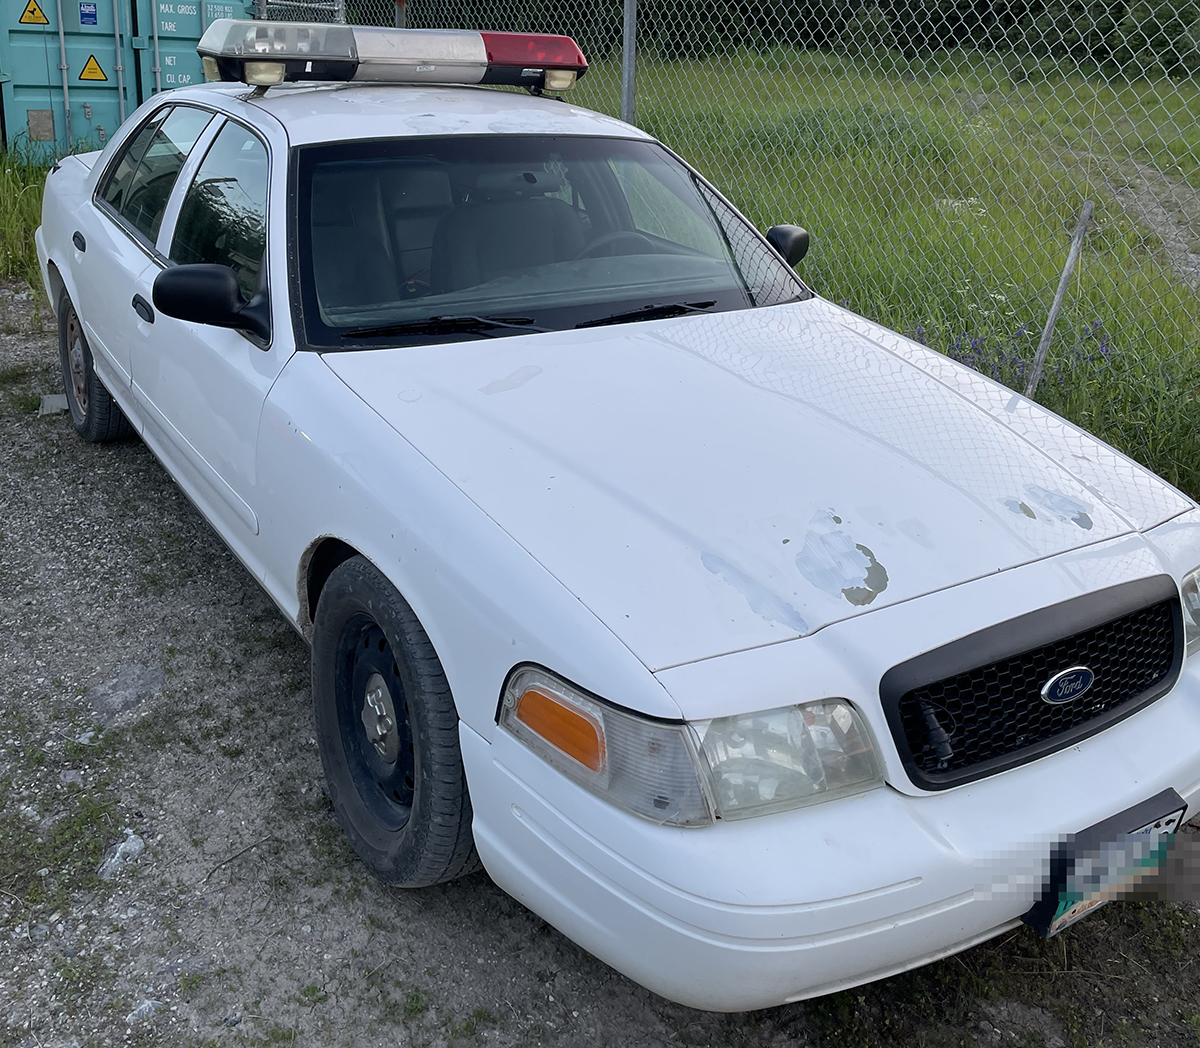 Mounties say a man attempted to pass through a community checkpoint at Nisichawayasihk Cree Nation driving this decommissioned police vehicle.